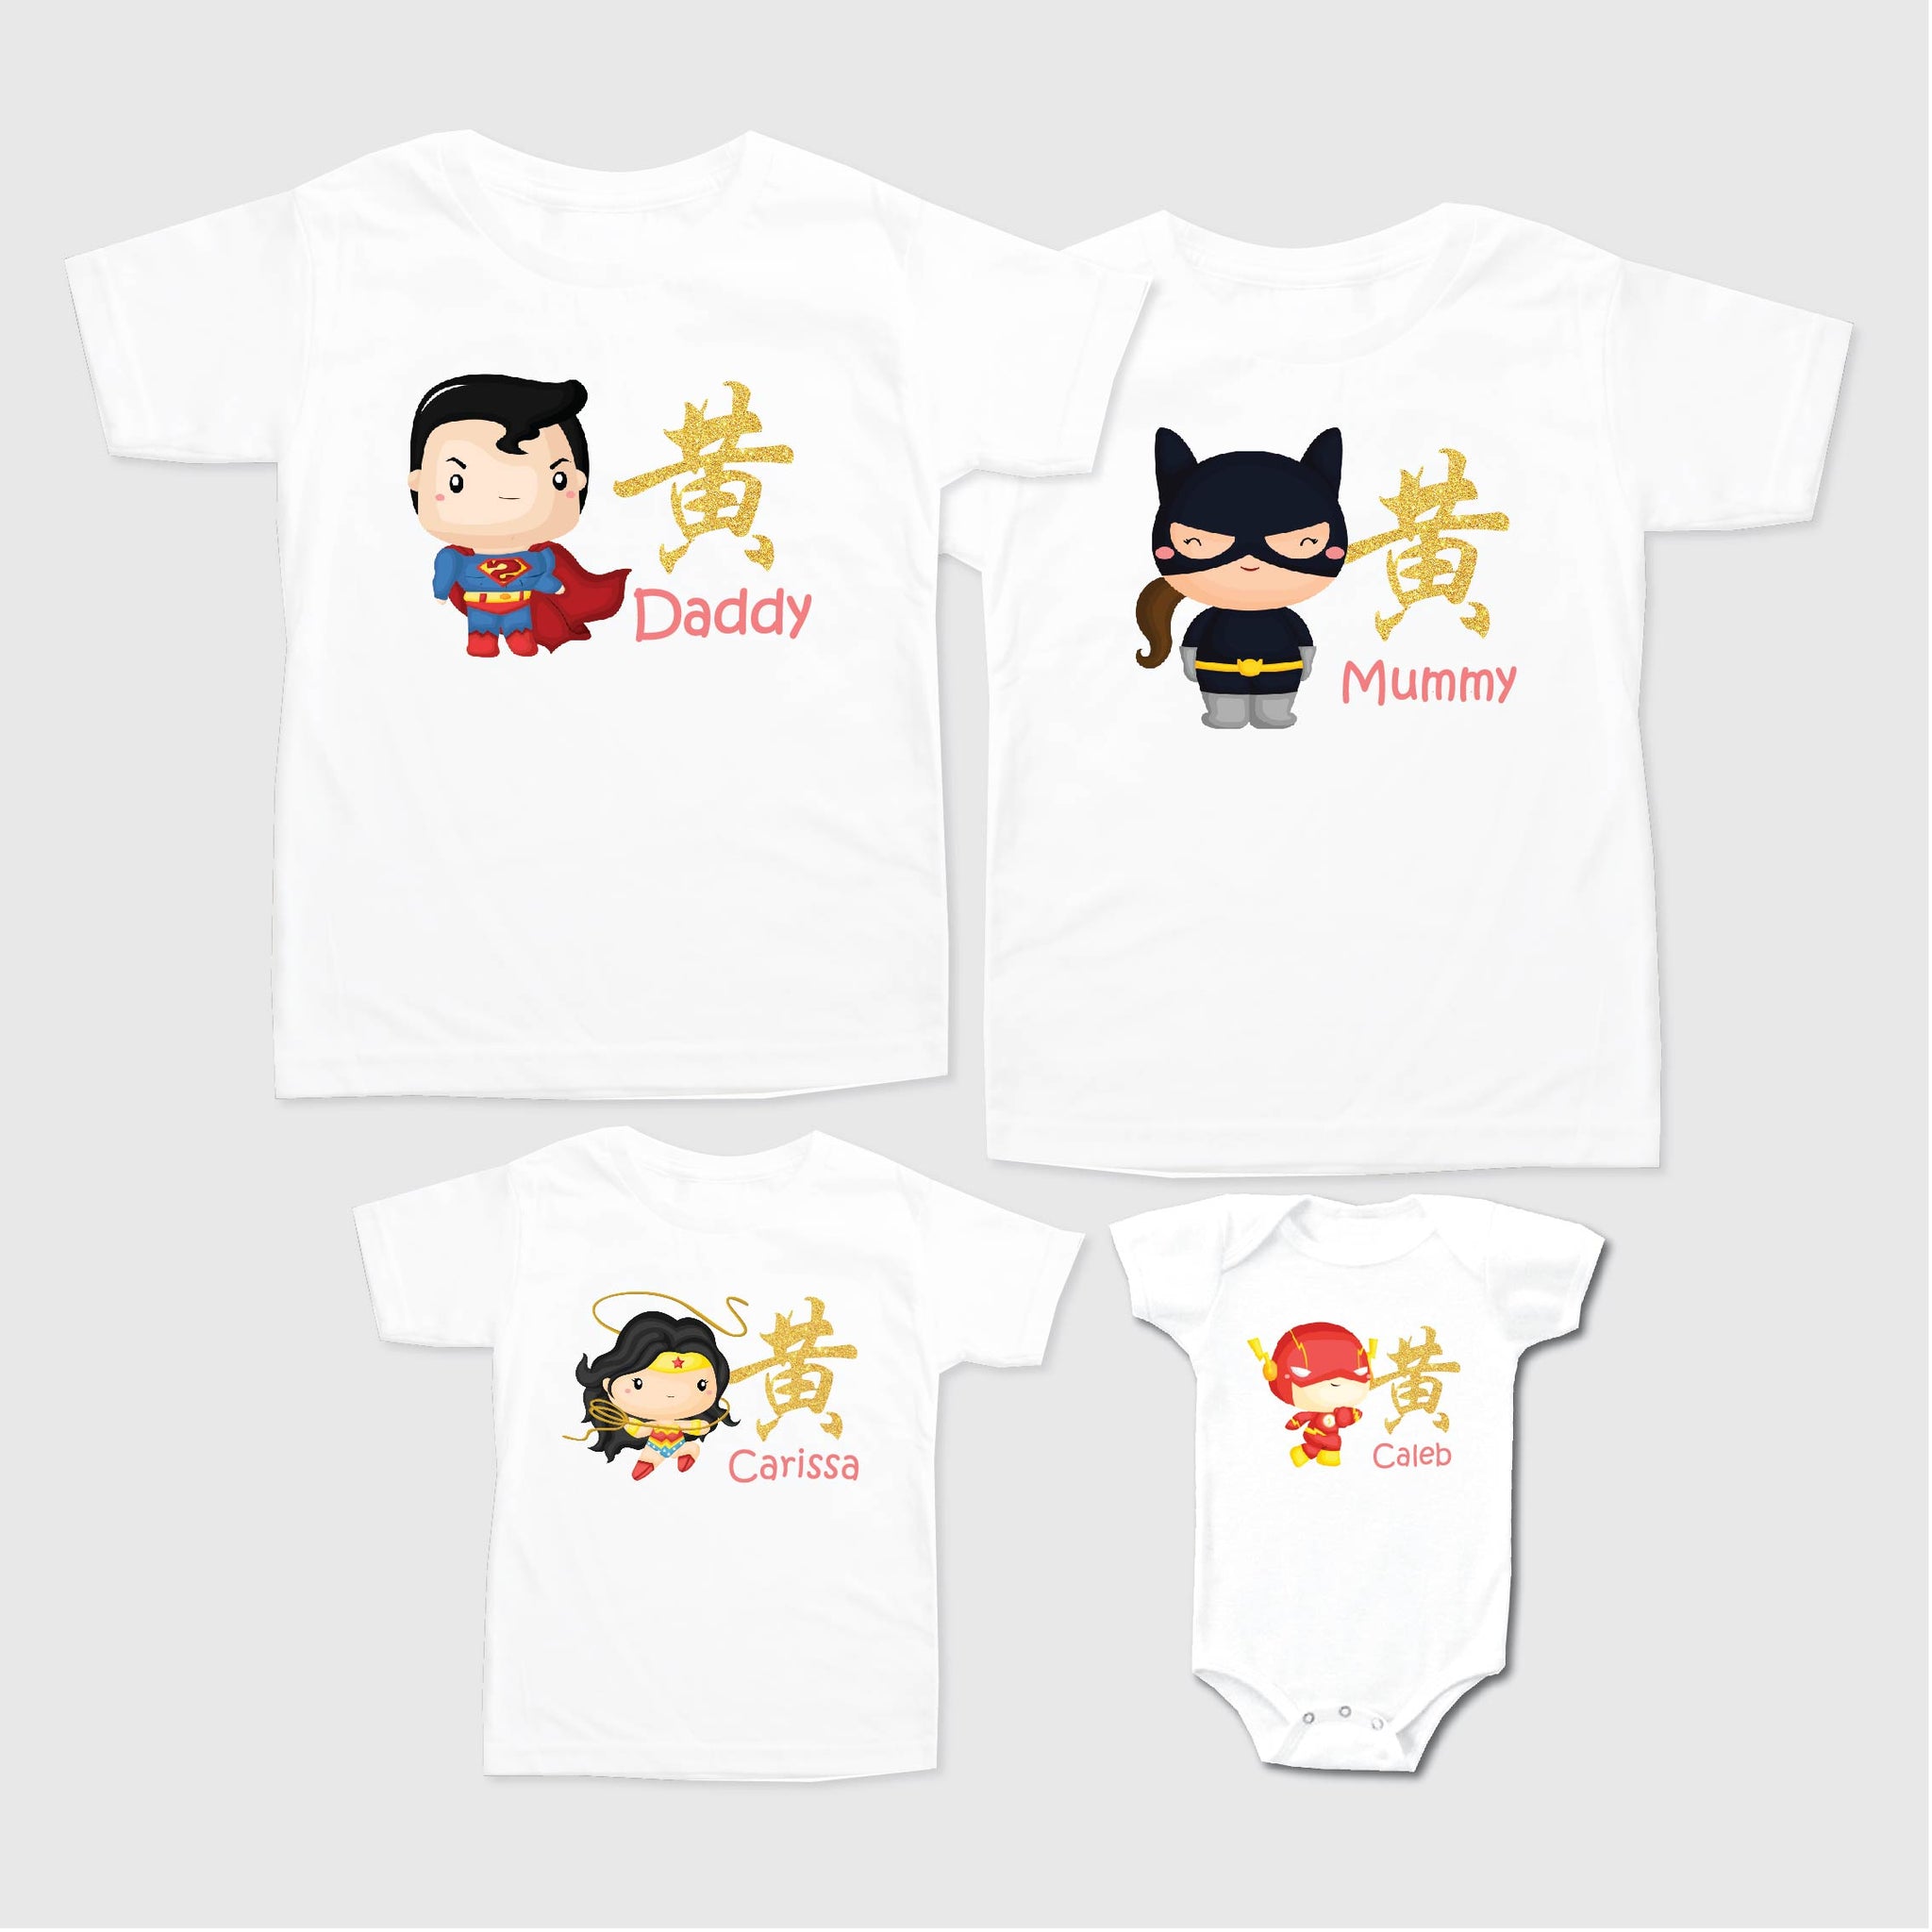 Personalised Family Tee Shirts - Super Clan (12 Designs)